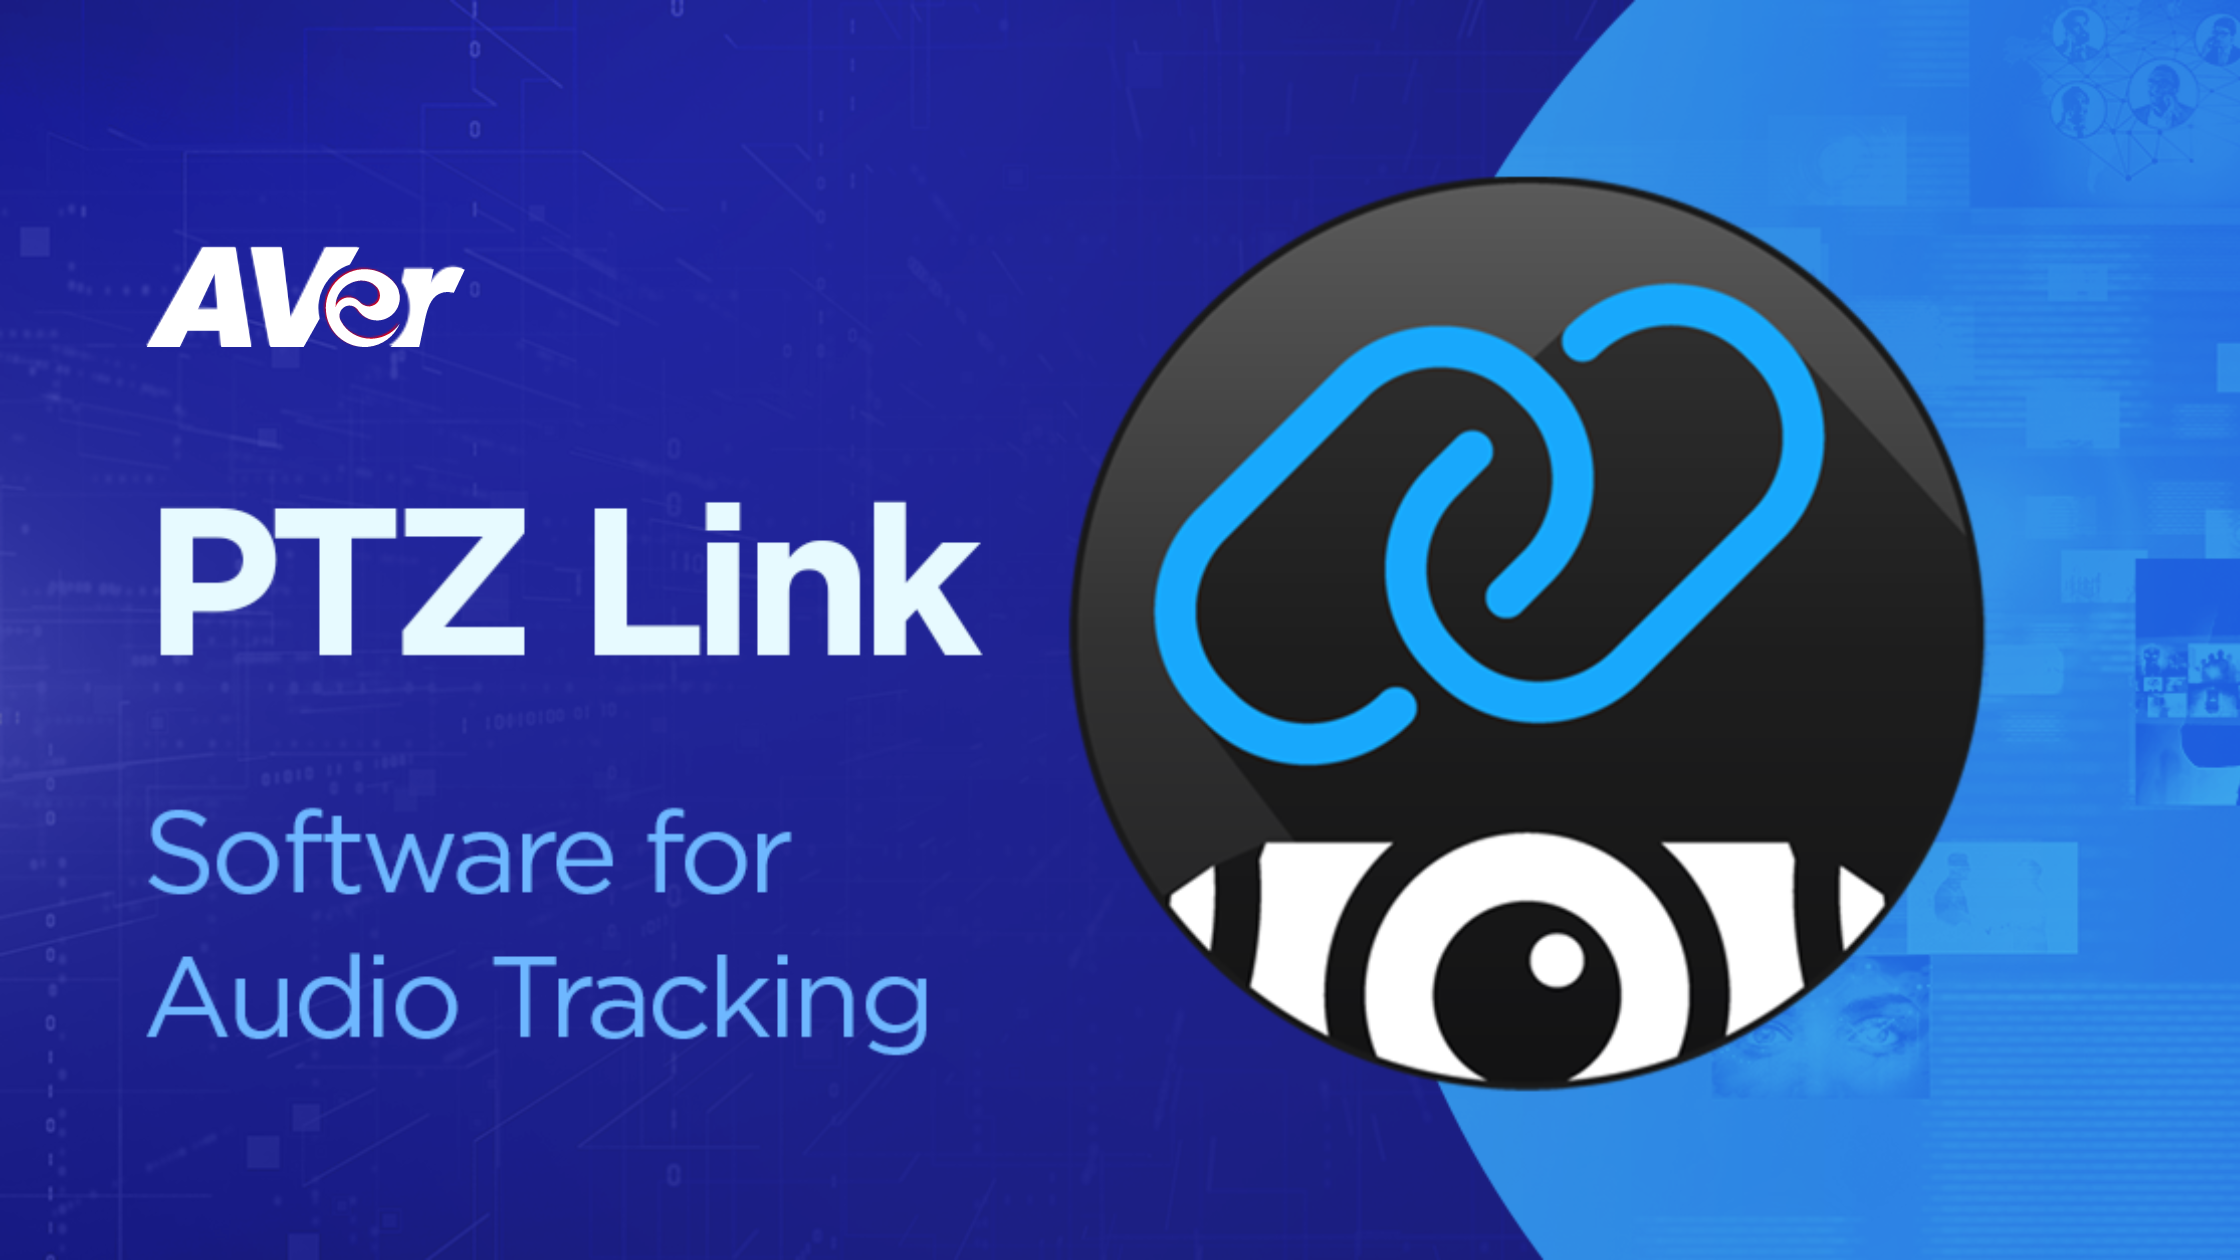 AVer PTZ Link Software add-on to turn any PTZ camera into audio-tracking camera